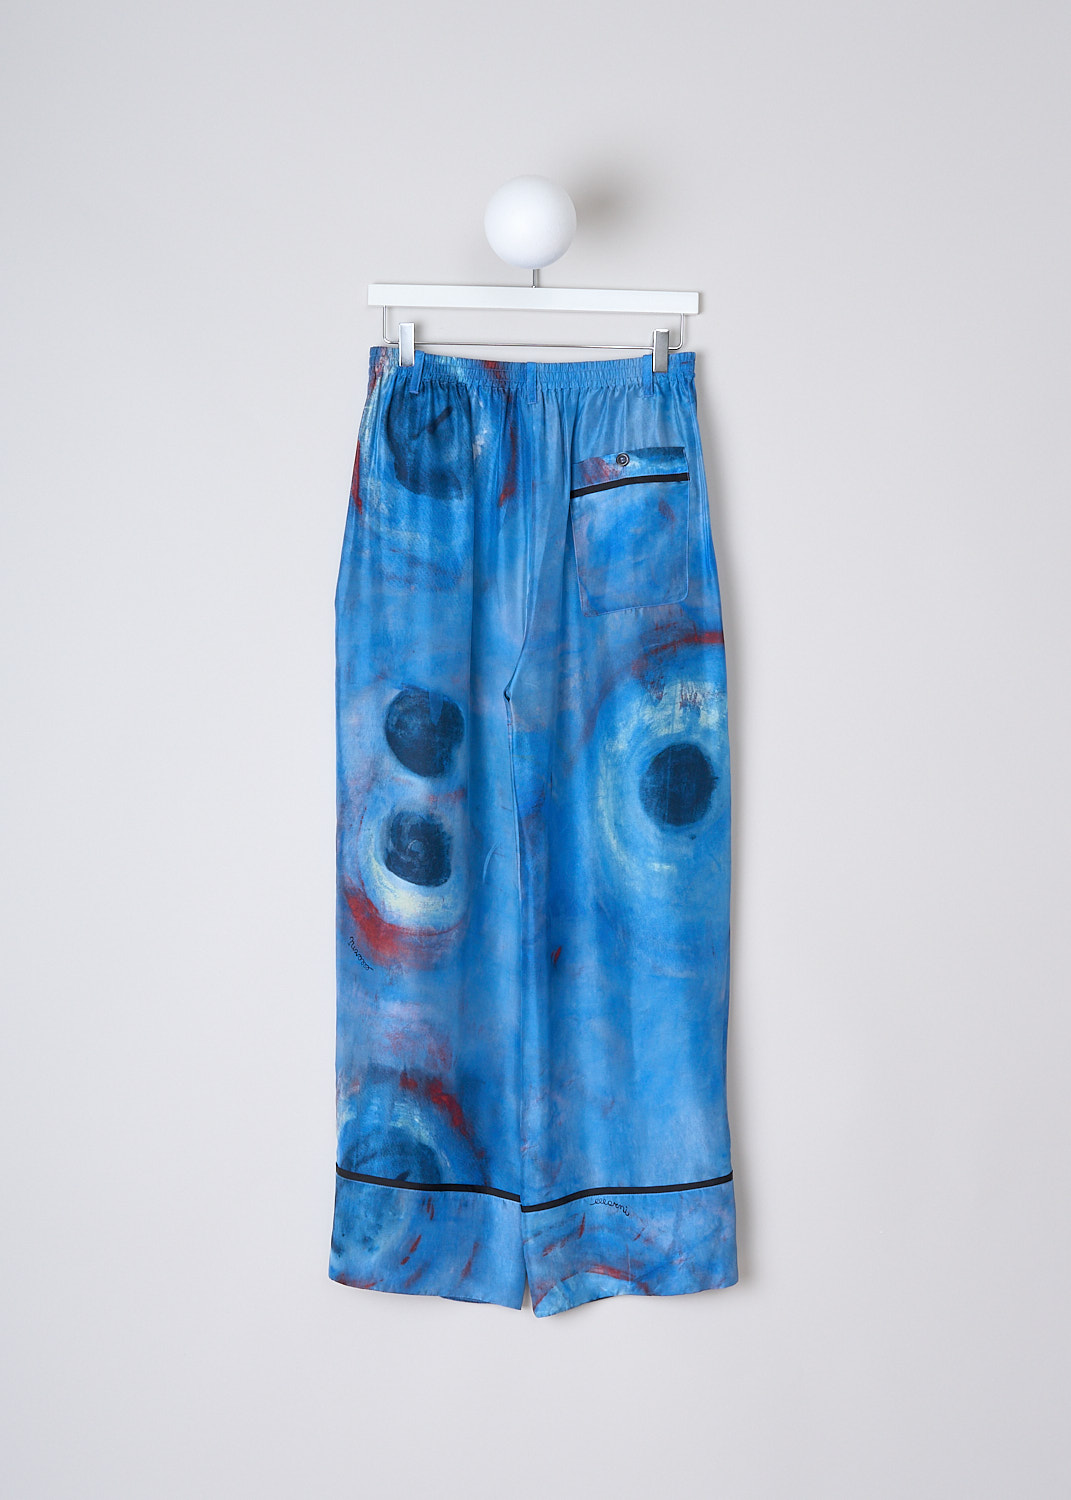 MARNI, COBALT BLUE SILK PANTS, PAMA0335I0_UTSF97_BBB44, Blue, Red, Print, Back, These high-waisted silk 'Buchi Blu' pants have an abstract print with painterly red and blue splotches throughout. These pants have a partly elasticated waistband with belt loop and a front button and zip closure. In the front, the pants have forward slanted pockets. The wide pant legs have a broad hem. In the back, these pants have a single buttoned patch pocket.
  
